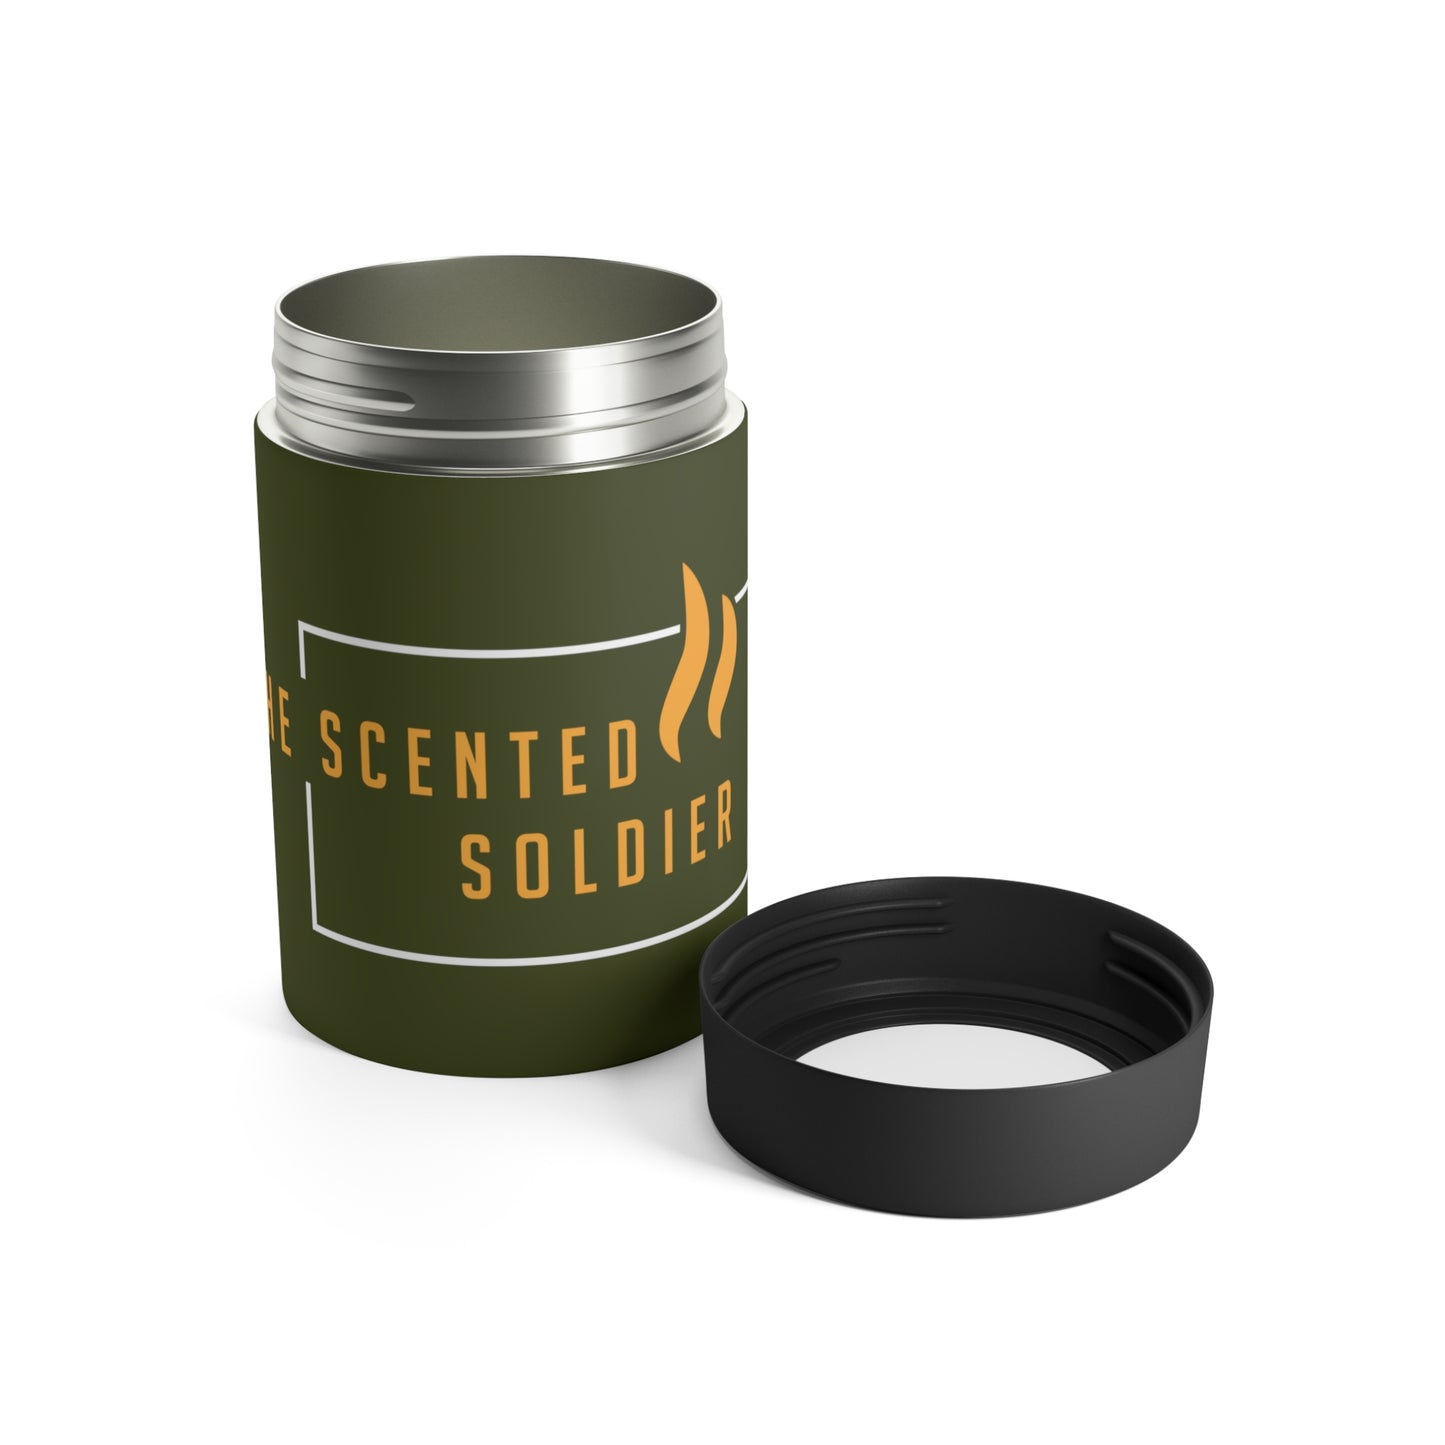 The Scented Soldier Can Holder